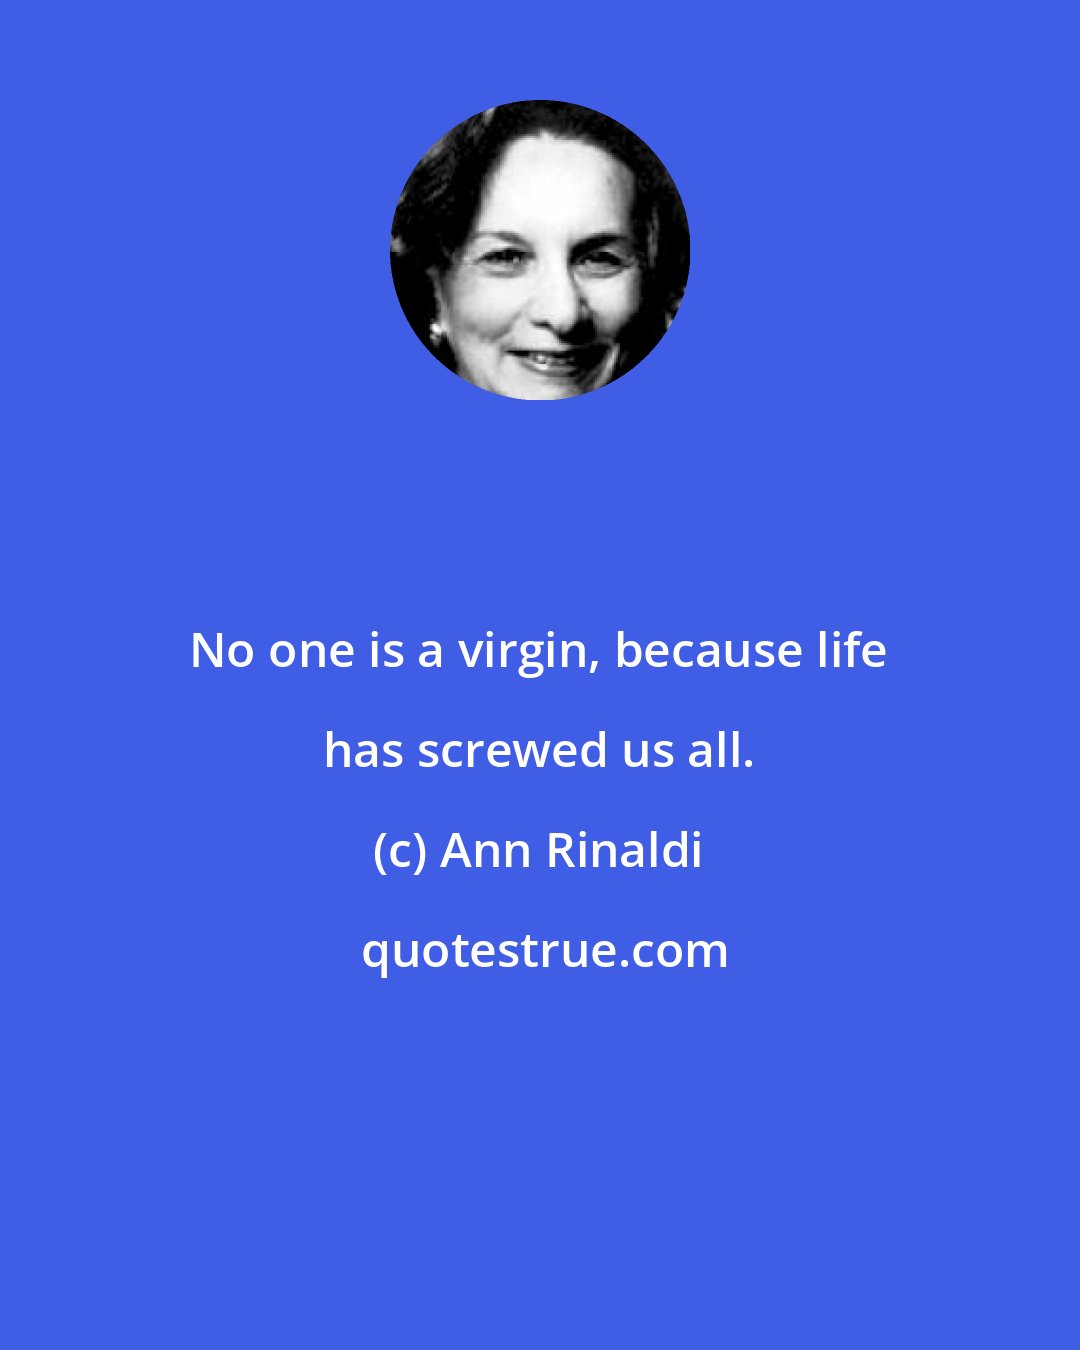 Ann Rinaldi: No one is a virgin, because life has screwed us all.